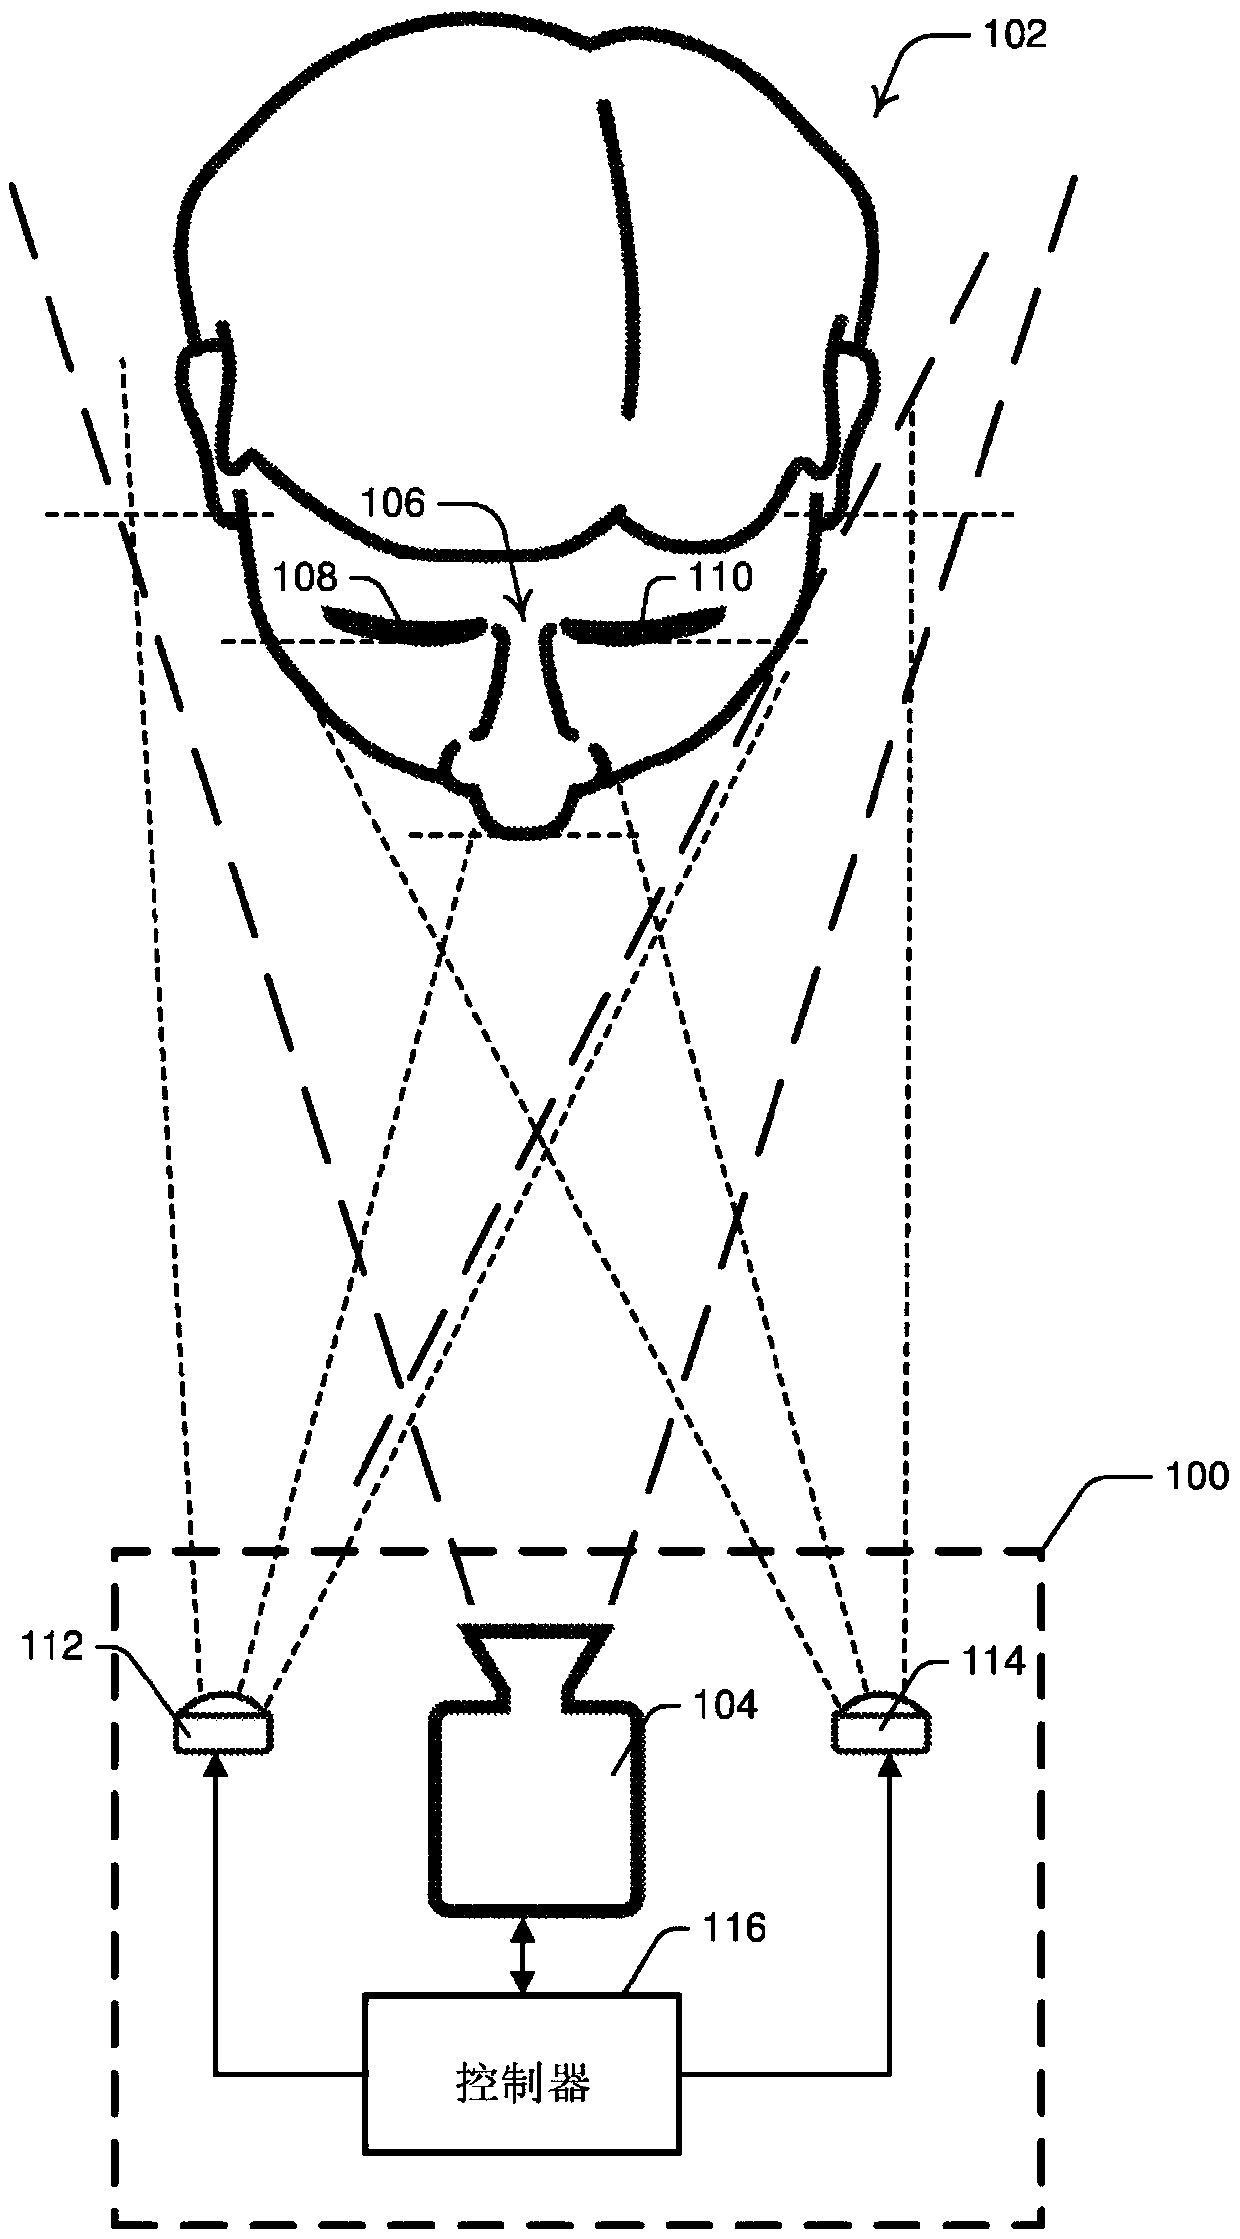 Systems and methods for performing eye gaze tracking